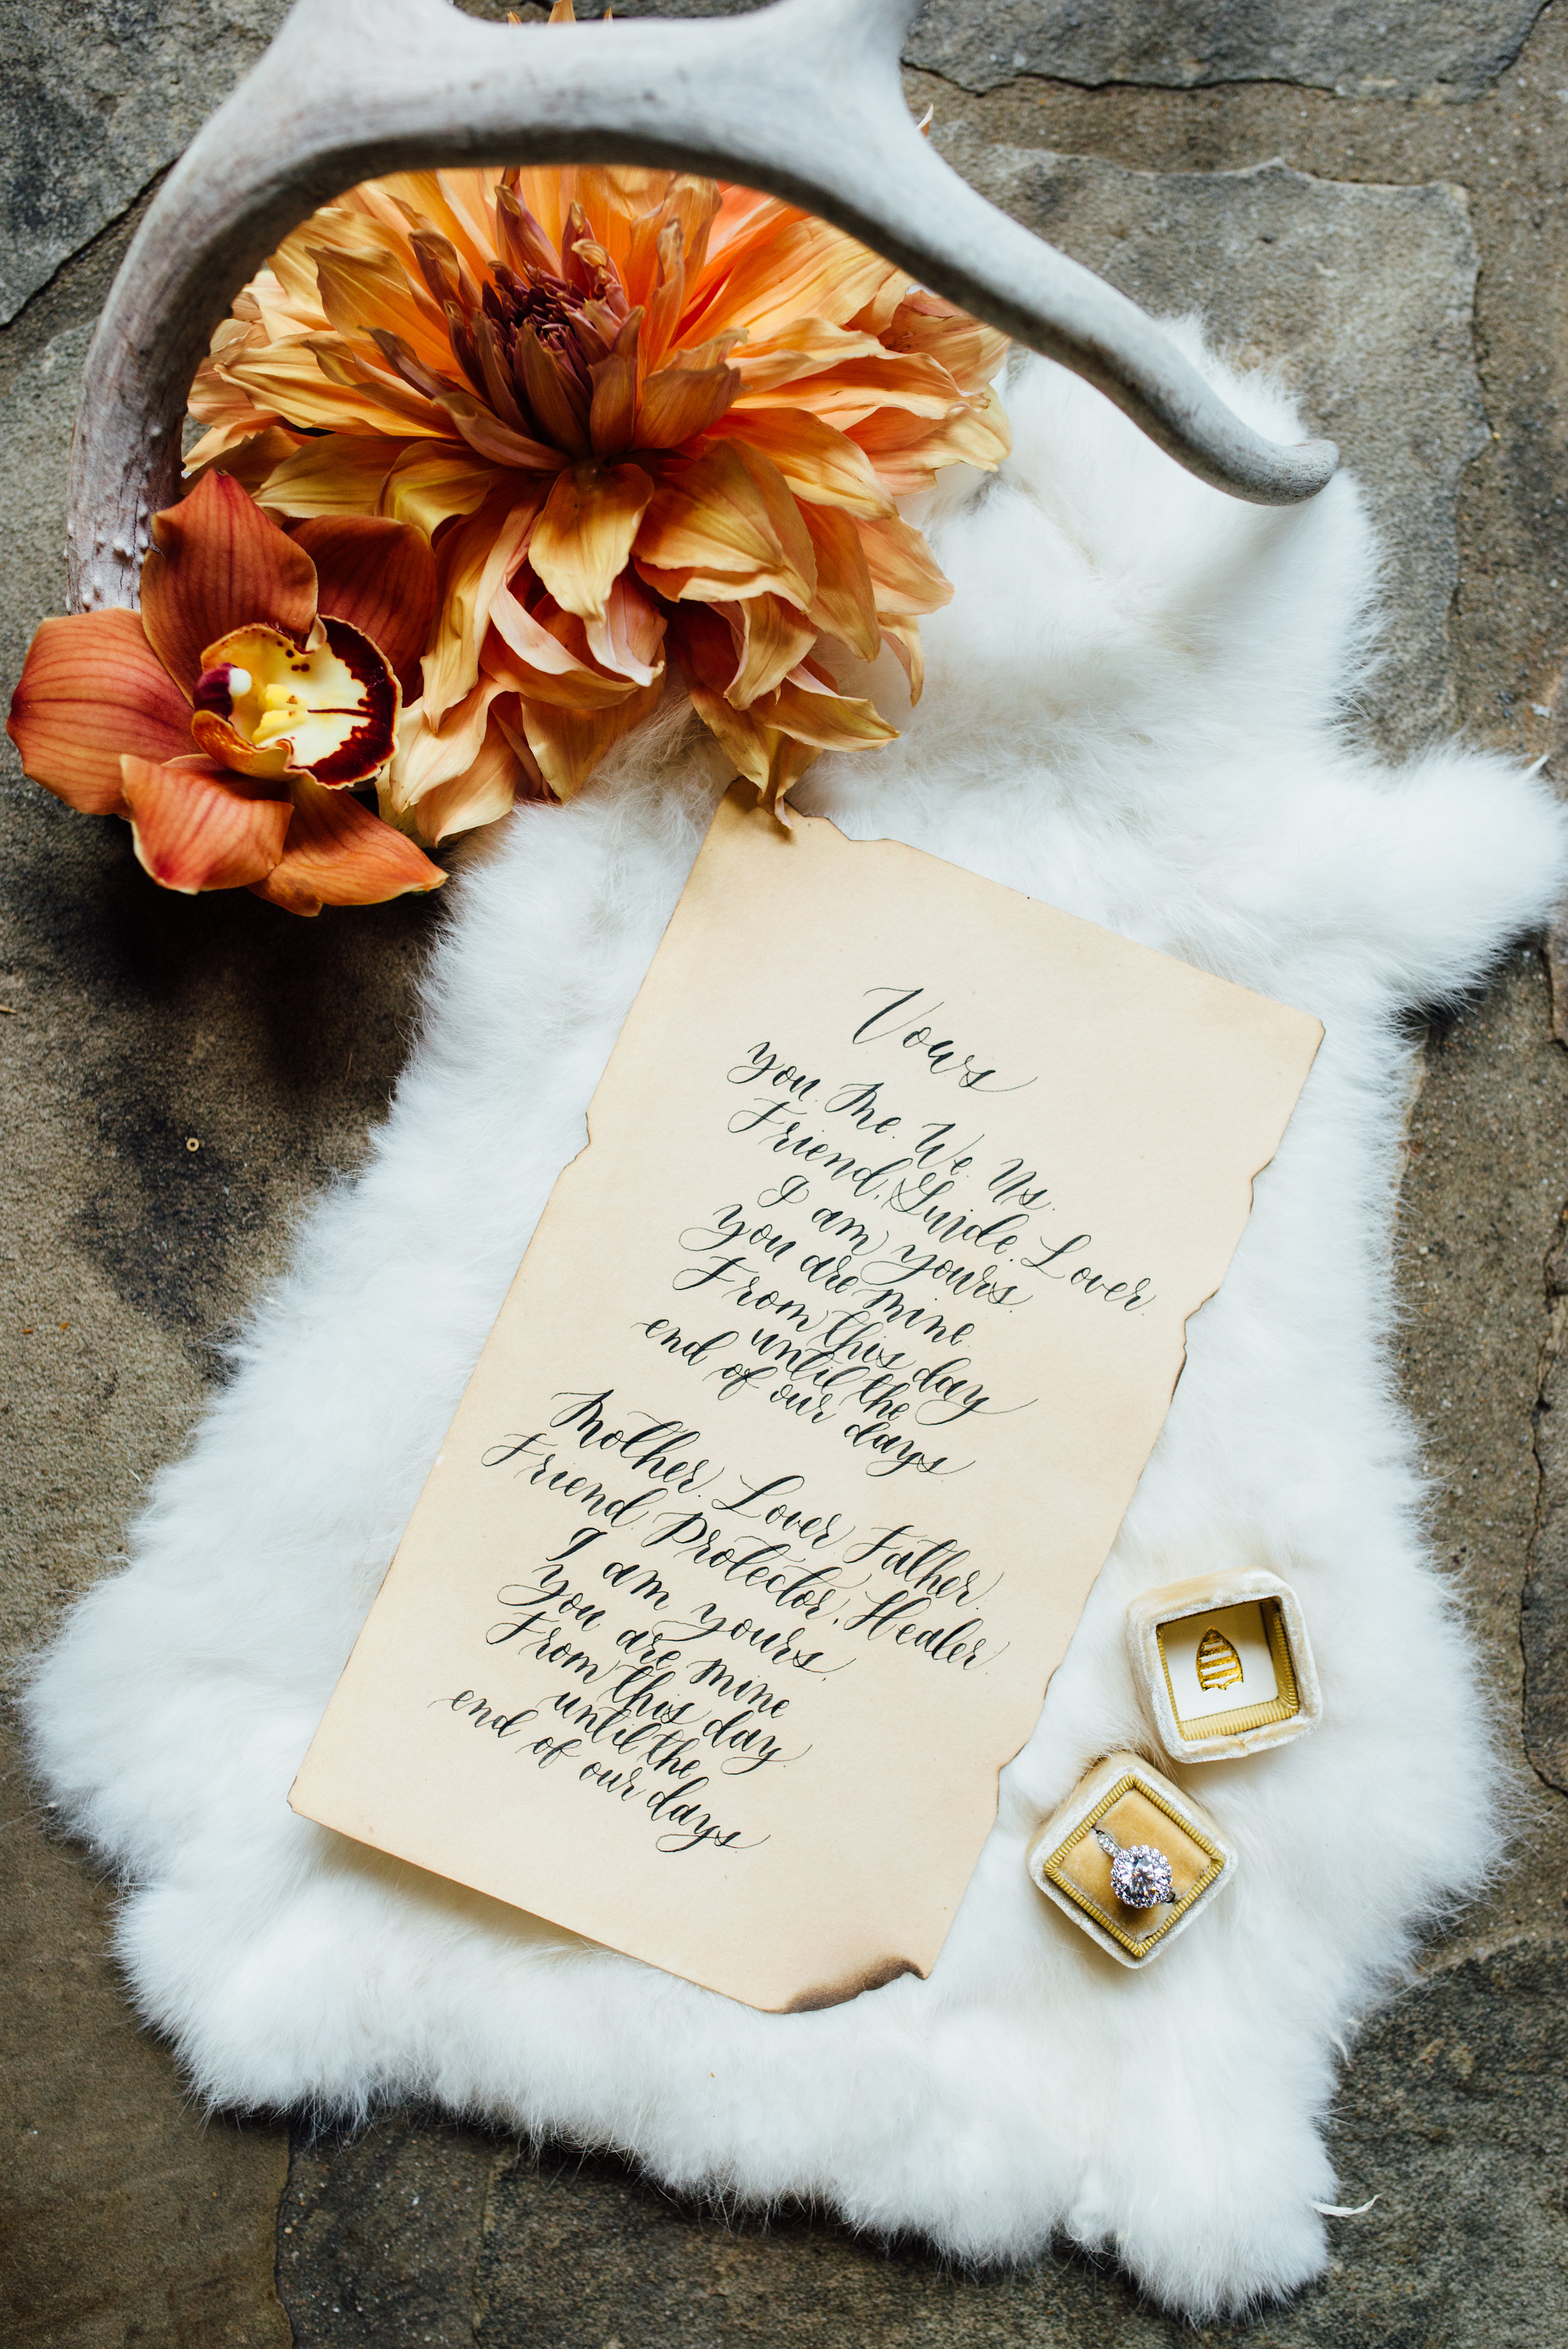  Game of Thrones Editorial Shoot by Whiskey &amp; White Events. At the Old Edwards Inn in Highlands, NC.&nbsp;  Photo by Cameron Reynolds Photography  Design &amp; Styling by Whiskey &amp; White Events  Paper by One and Only Paper  Calligraphy by Qui